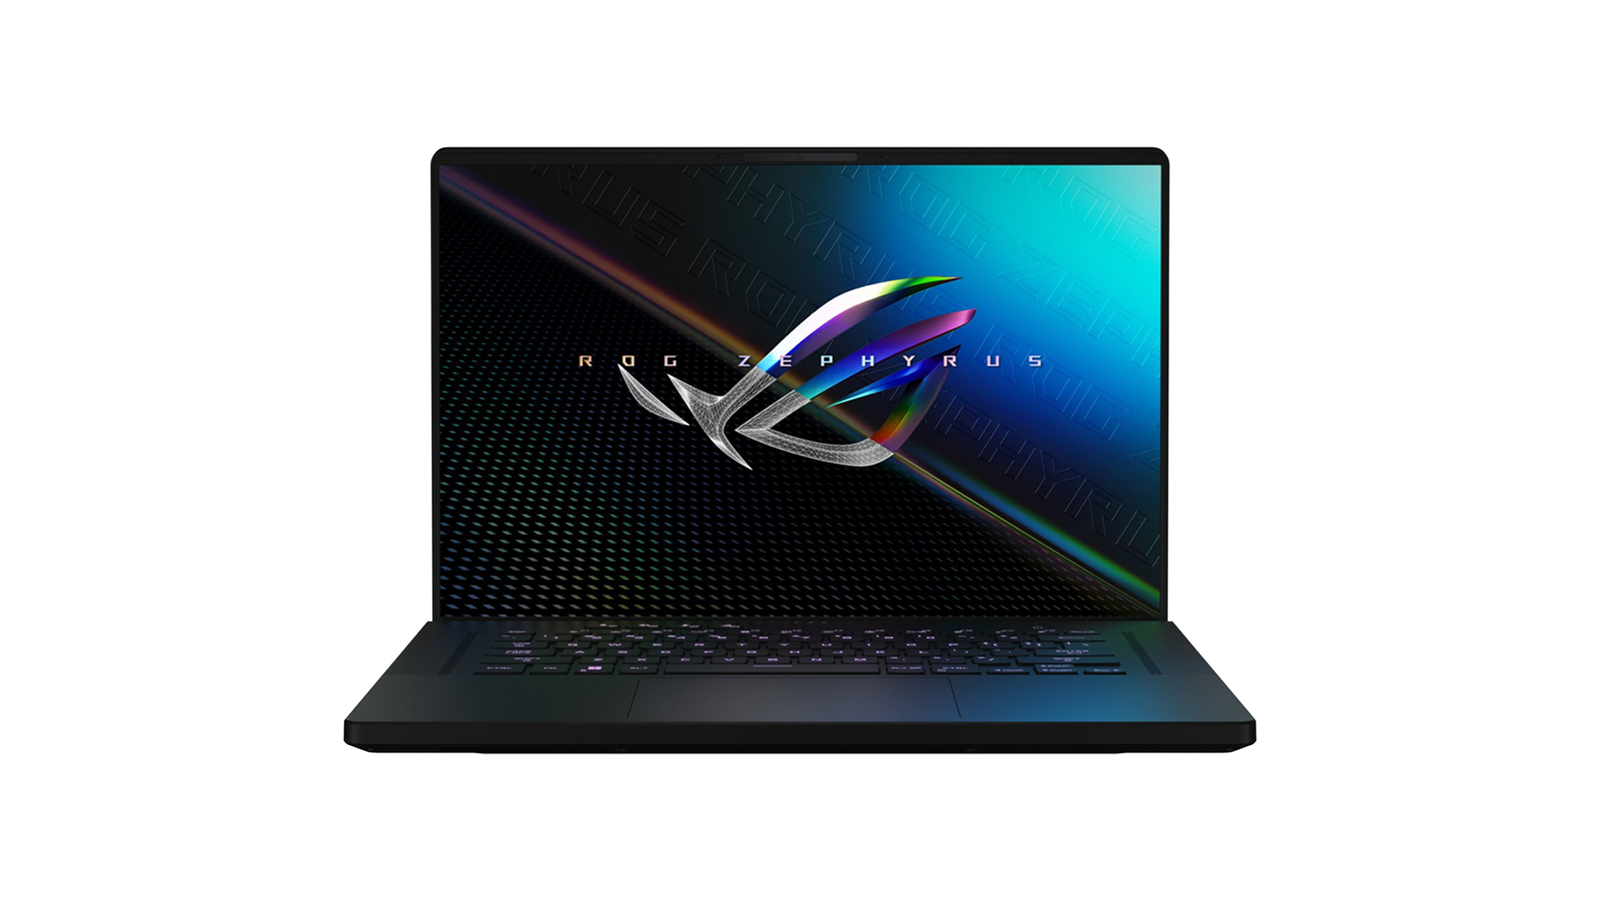 ASUS ROG Zephyrus M16 - The most powerful Windows laptop for CAD.